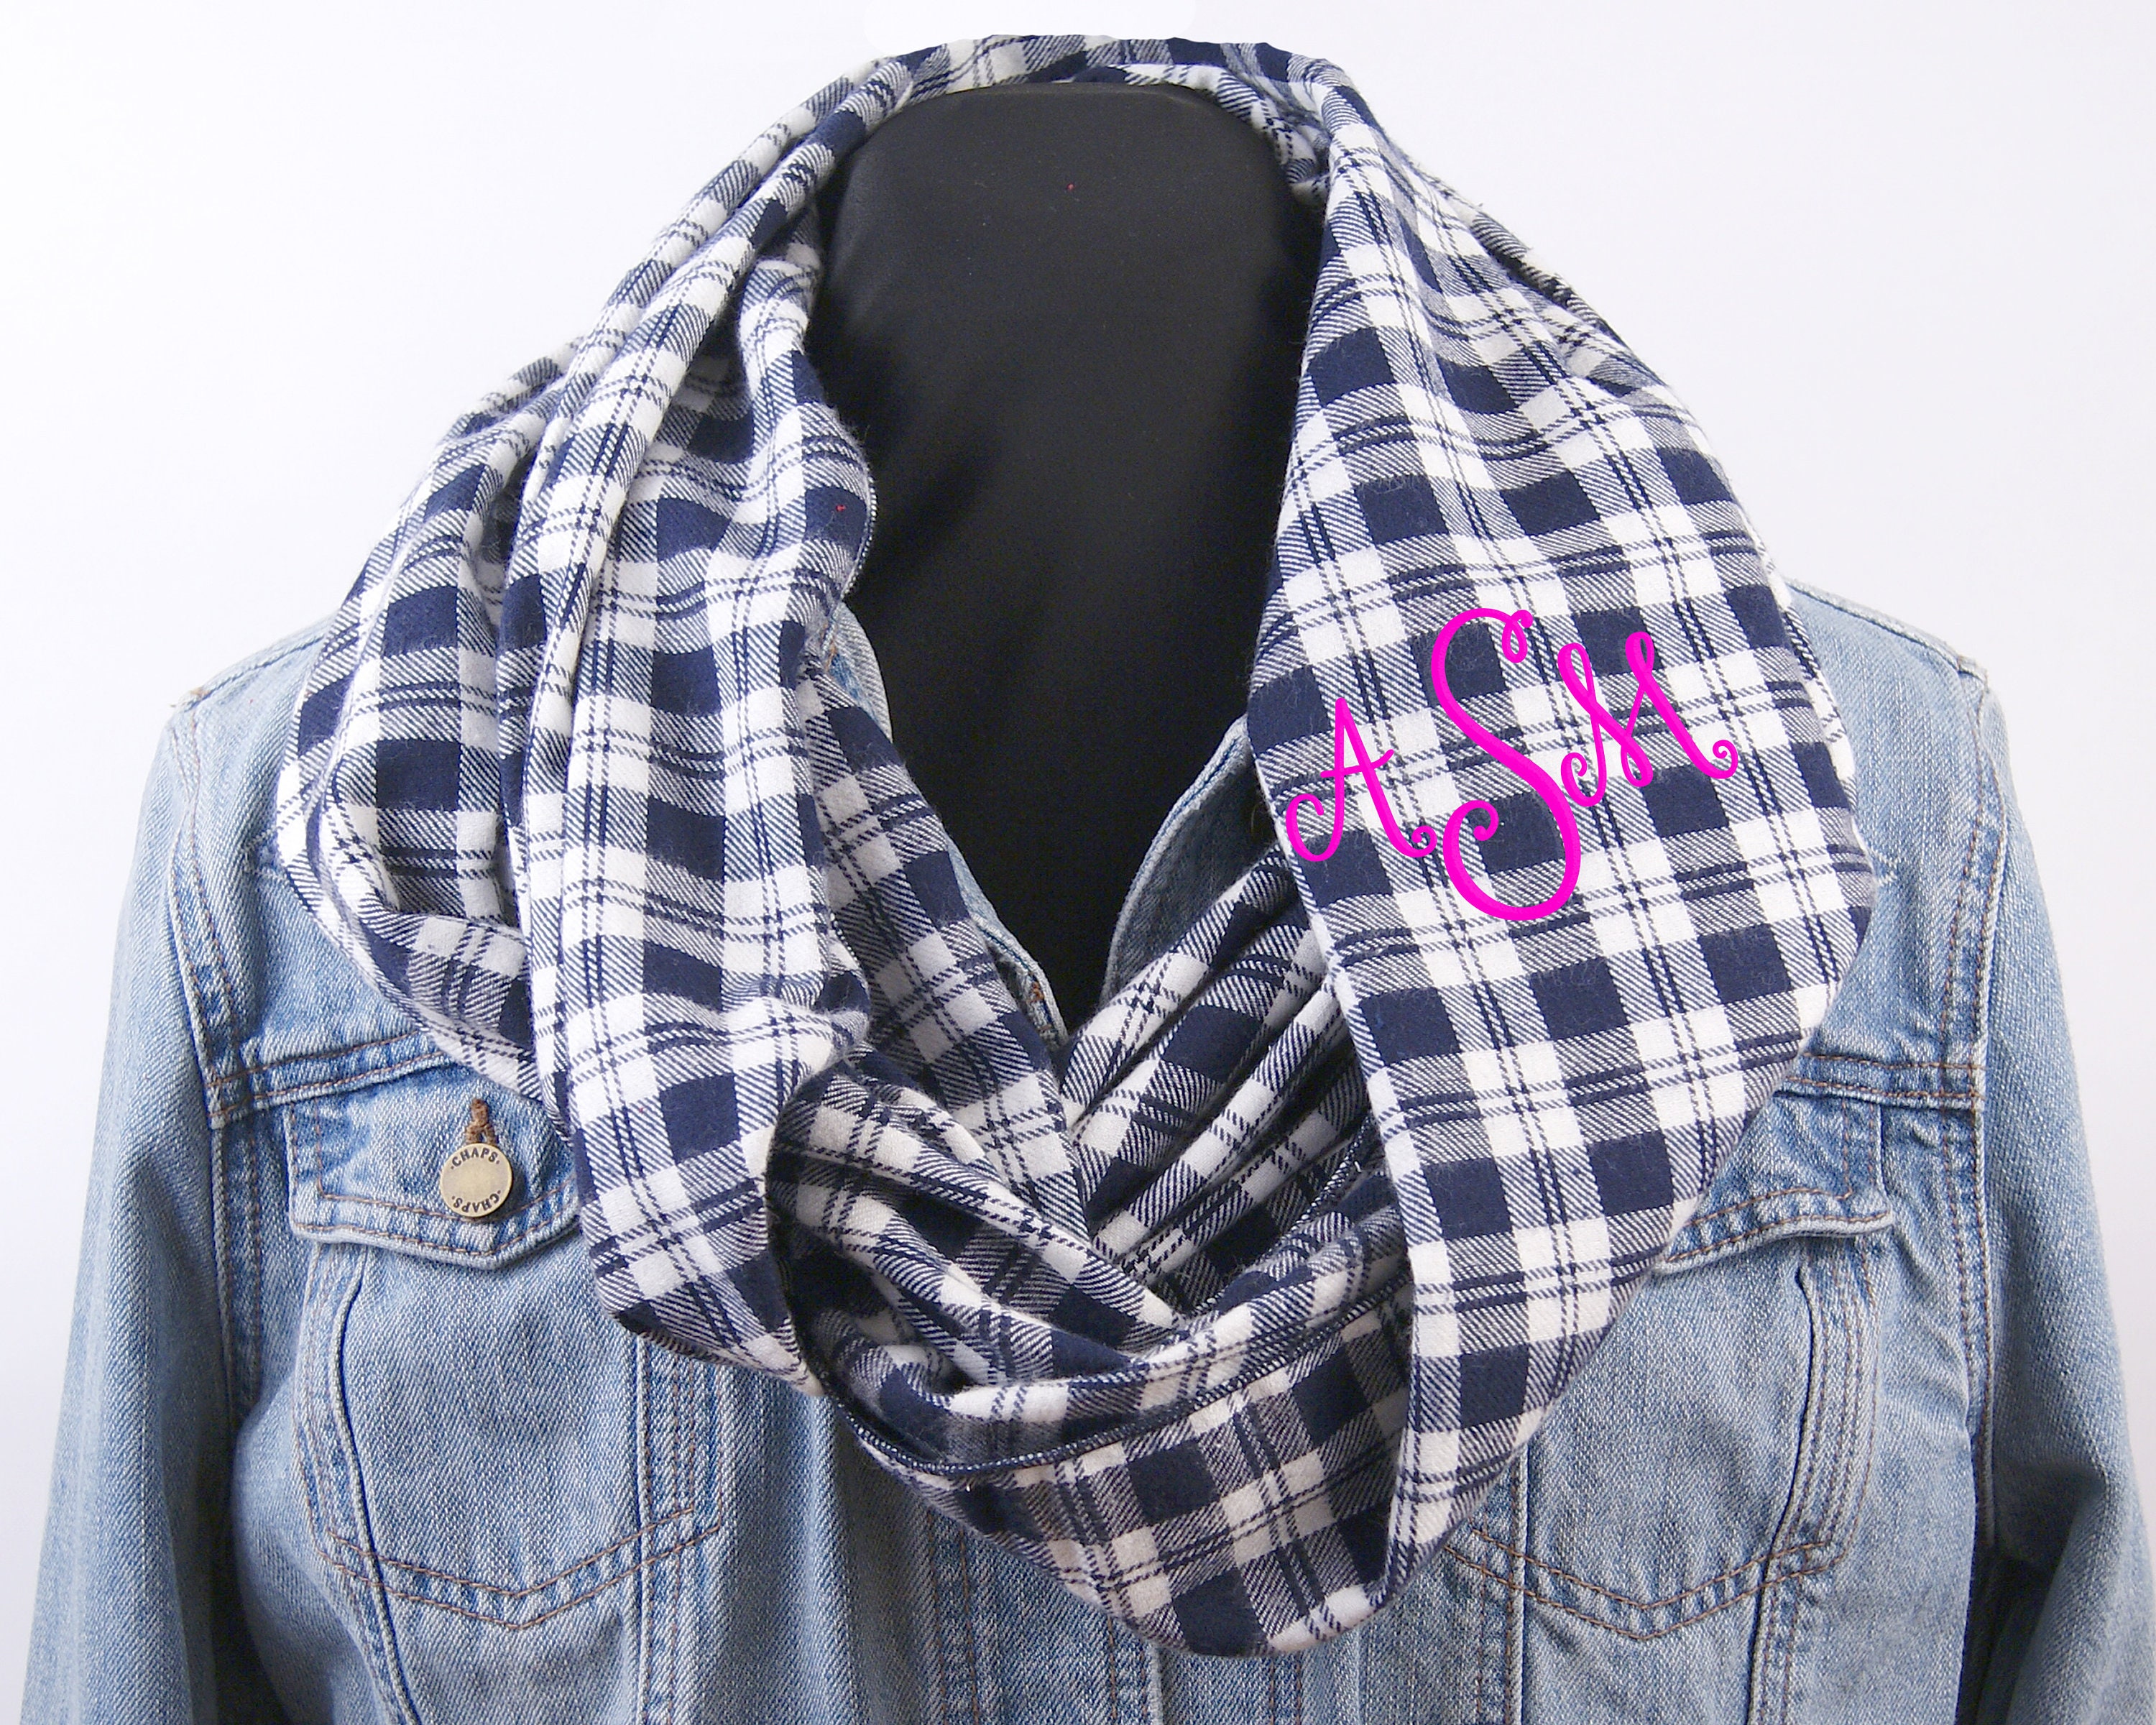 Monogrammed Infinity Scarf, Monogrammed Scarf, Navy and White